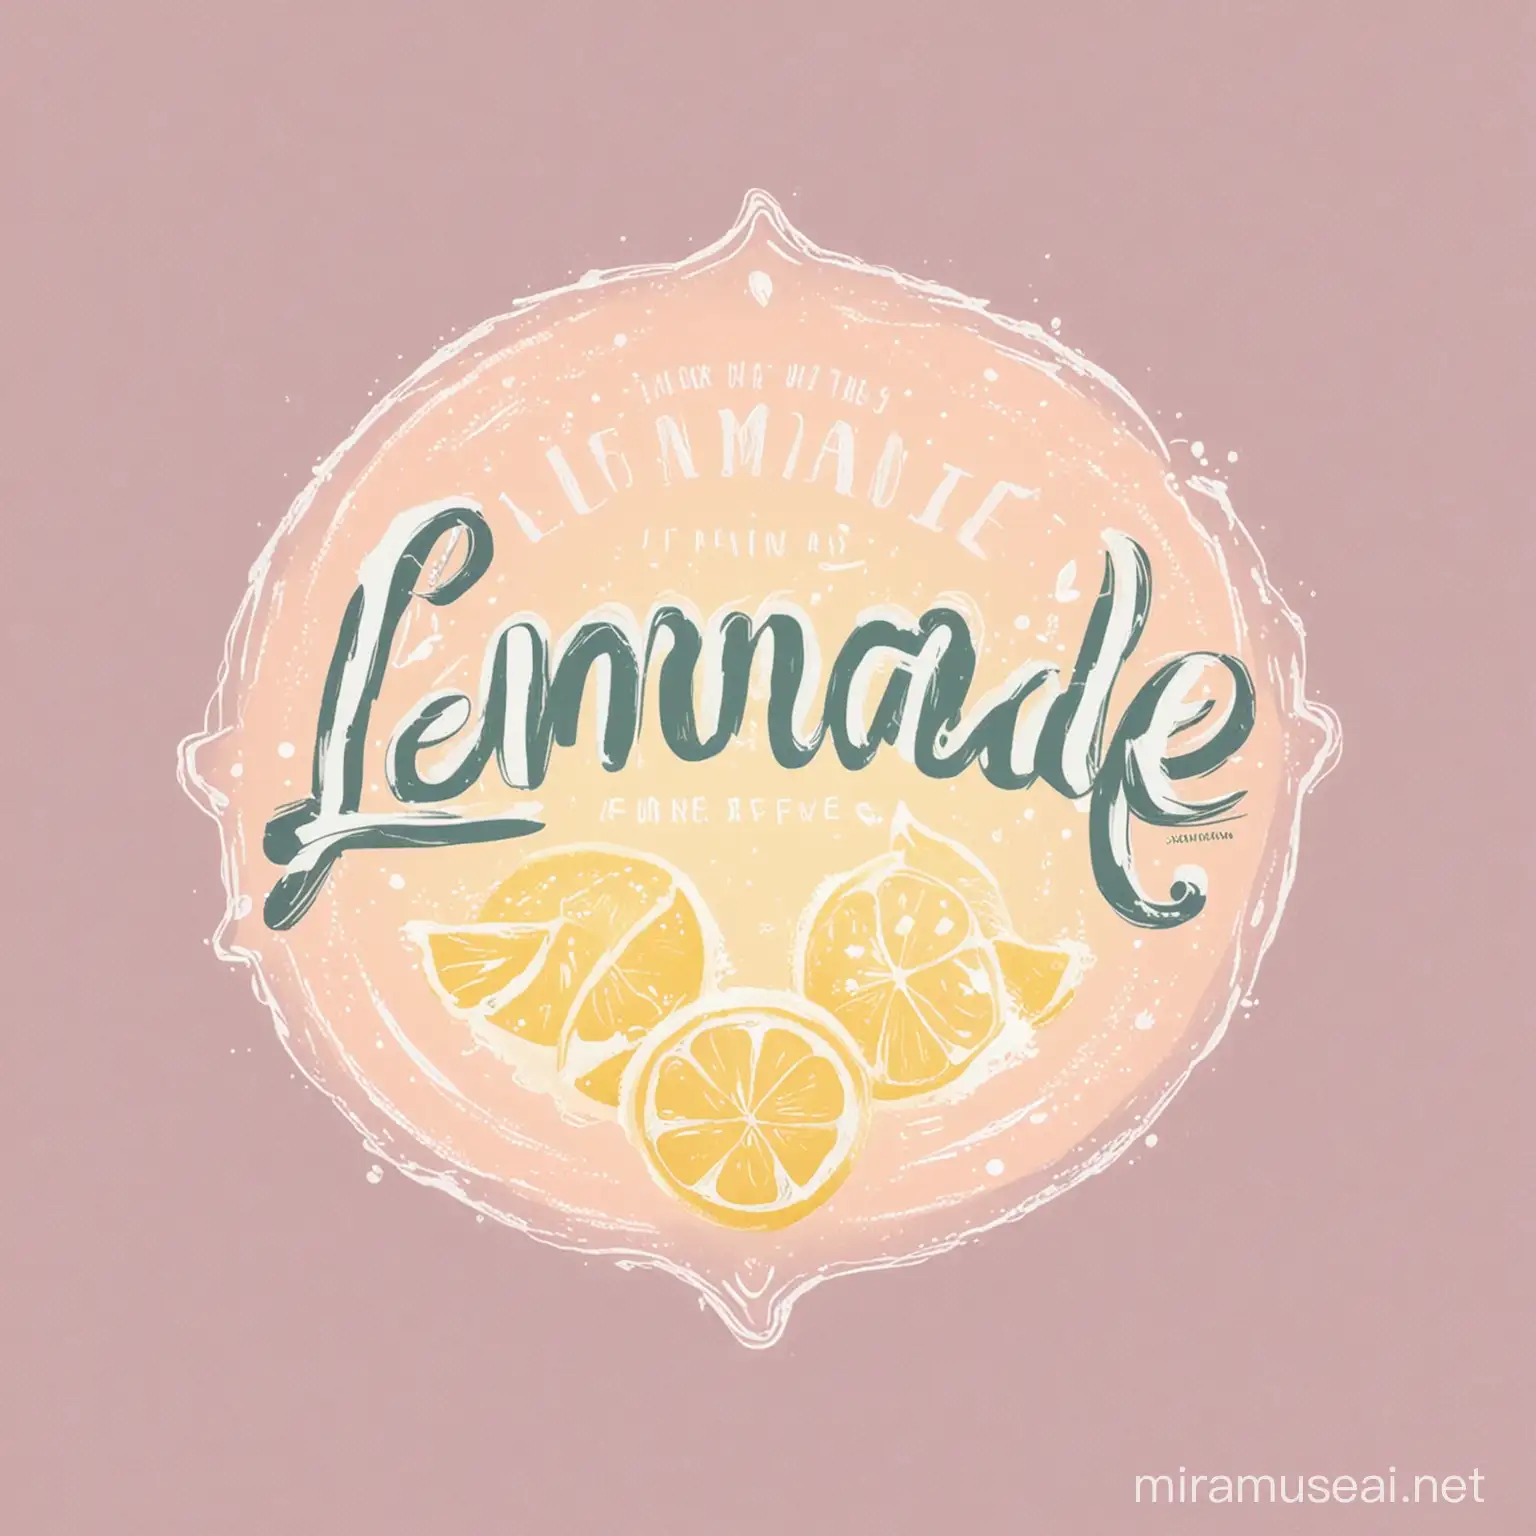 give me a line-art logo for a company called lemonade breathwork.  Using pastel colors of lemonade.  The letters LMND underneath